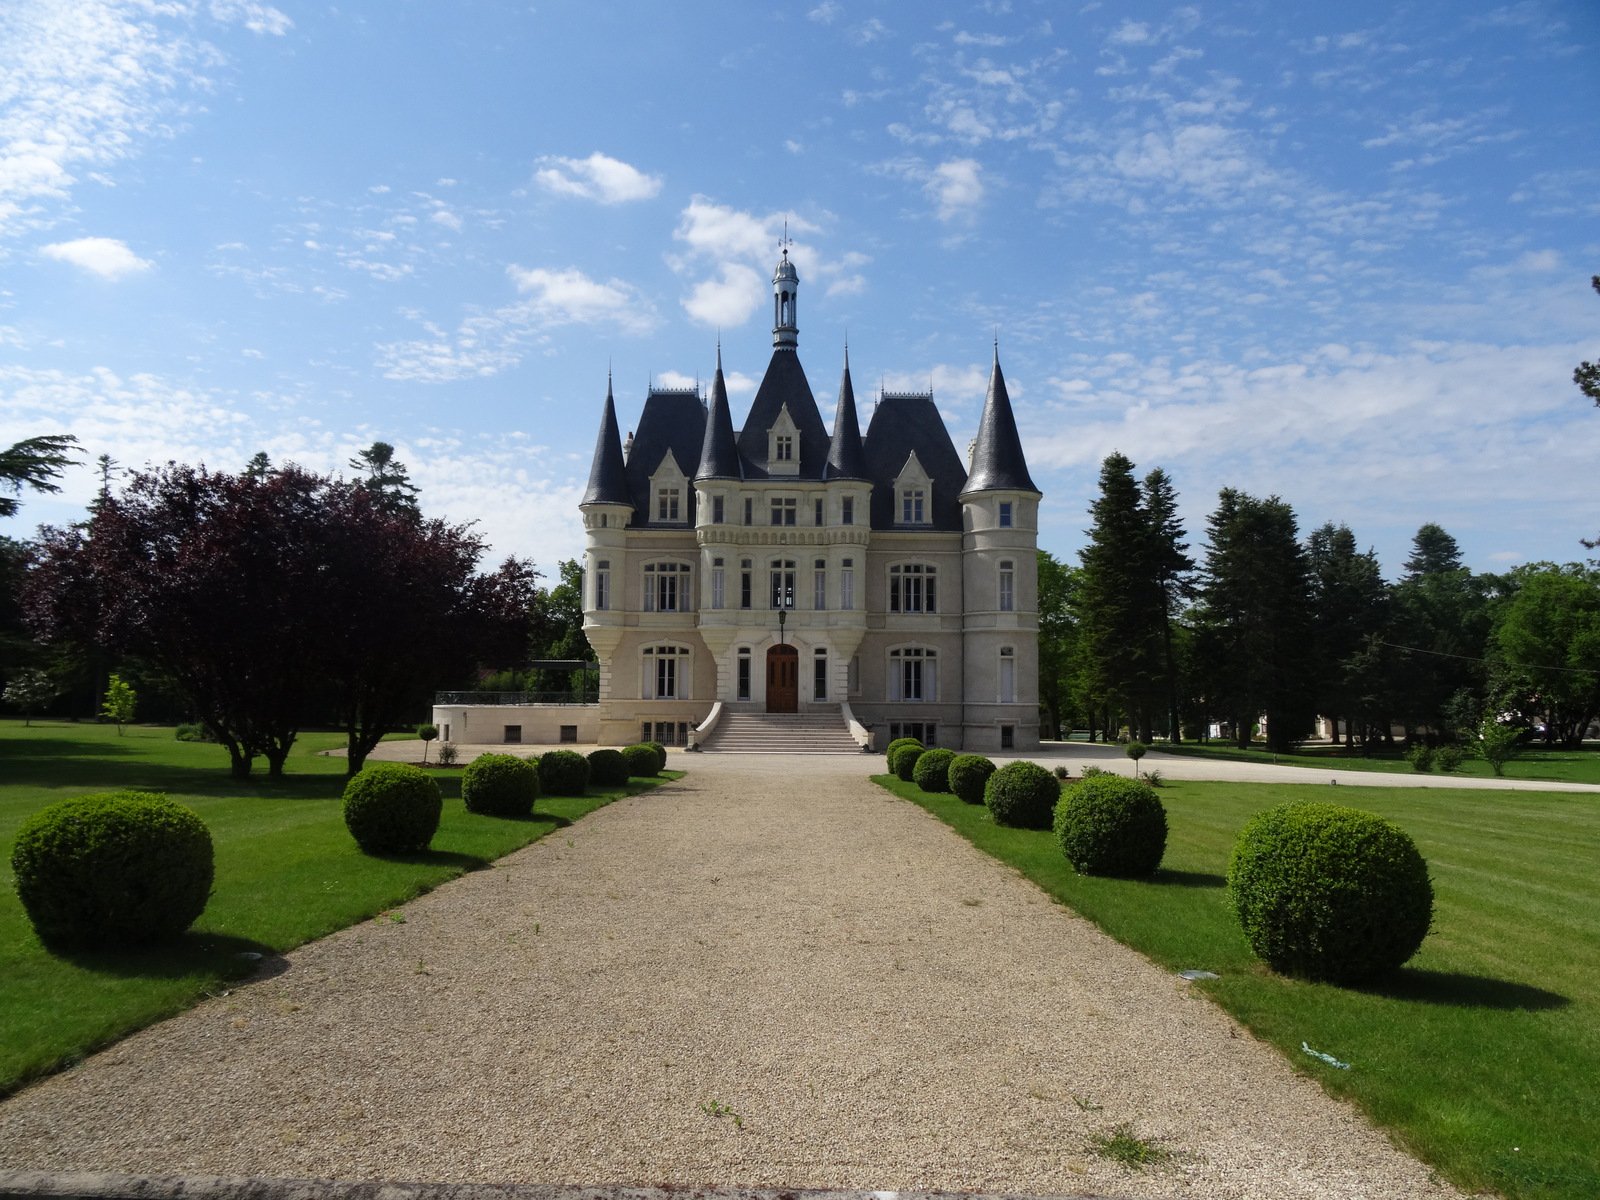 Conveniently located just 15 km from Poitiers, this exceptional 19th century luxury chateau is of a rare elegance. Beautifully restored to a very high specification, this outstanding property offers 900 m² of living space on four levels.